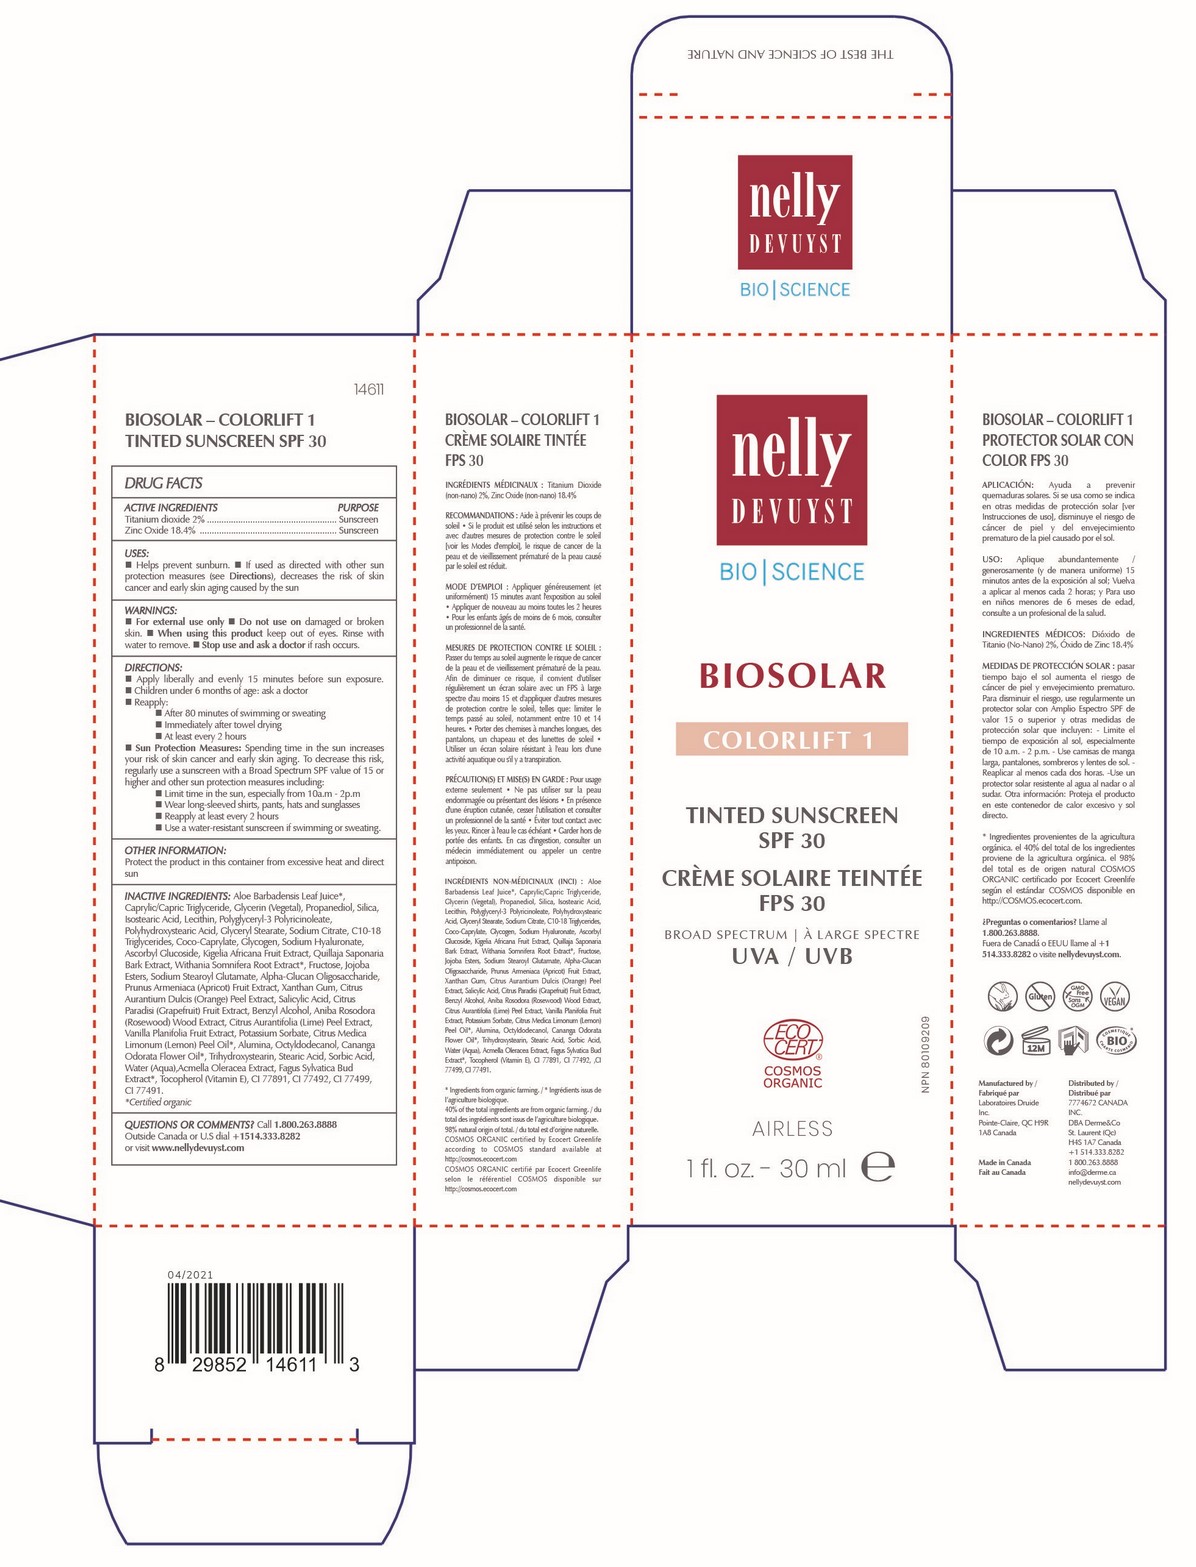 Nelly Devuyst Biosolar Colorlift 1 Tinted Sunscreen 30 mL 